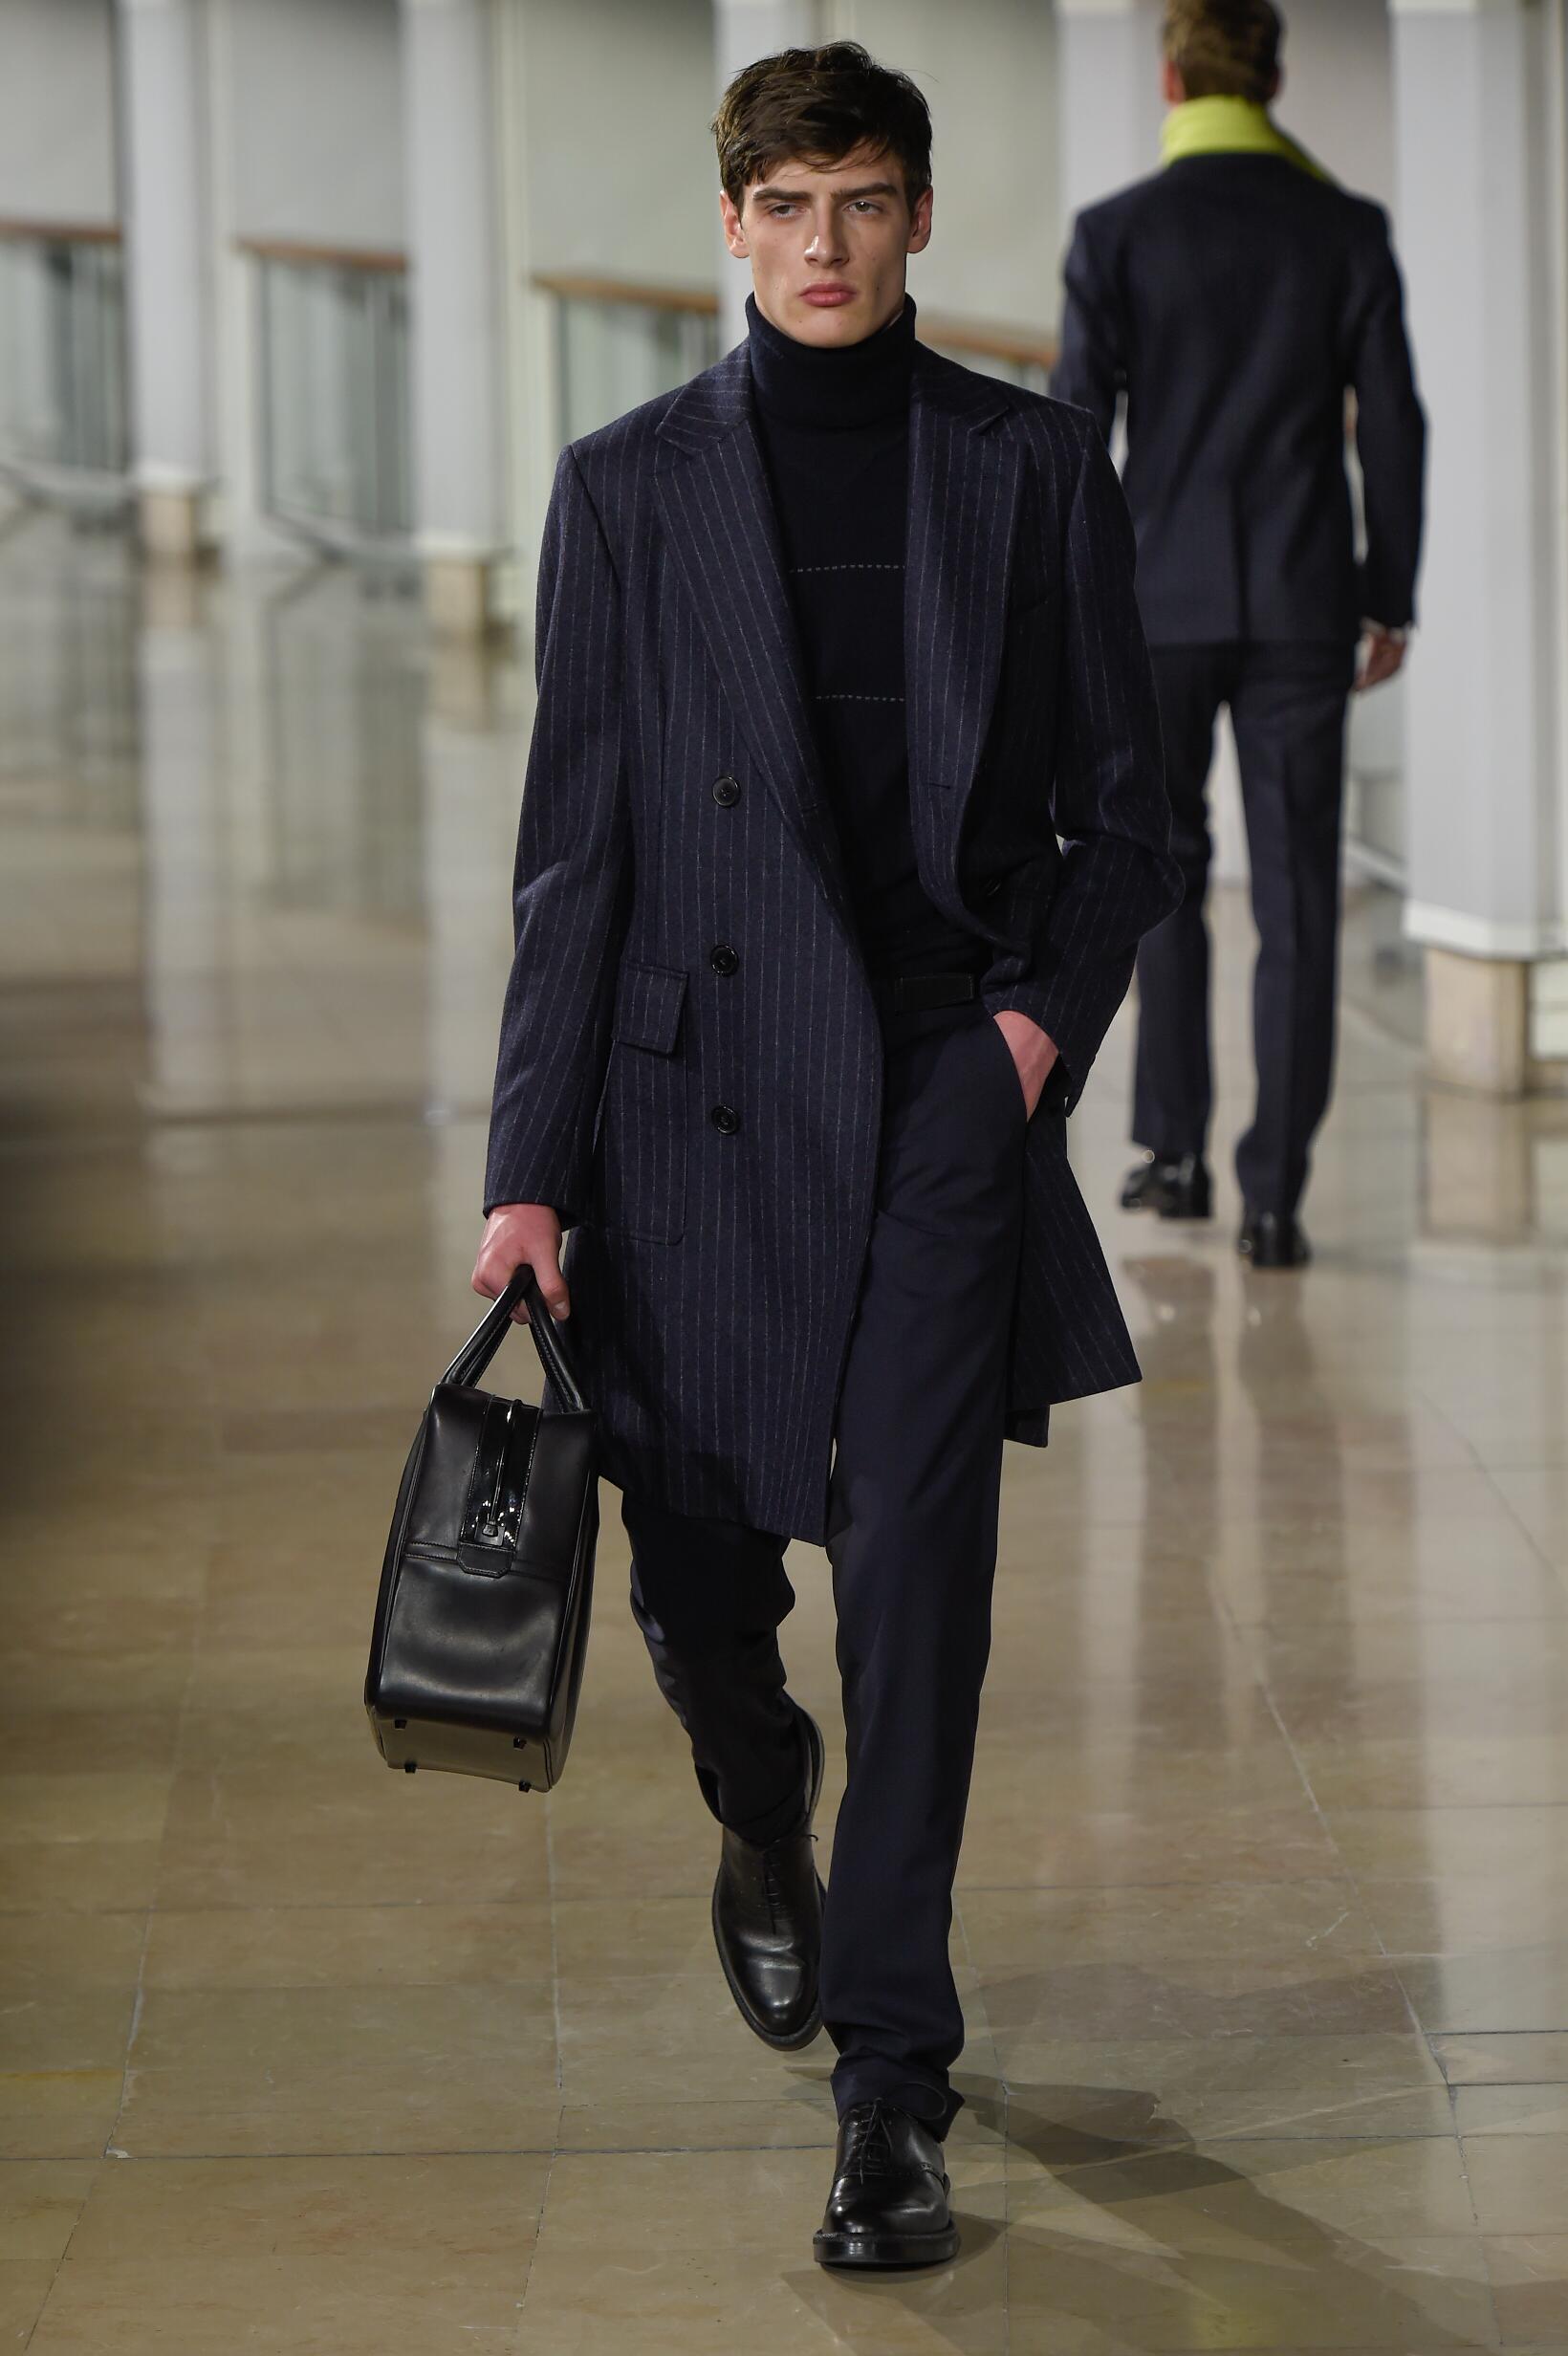 HERMÈS FALL WINTER 2015-16 MEN’S COLLECTION | The Skinny Beep